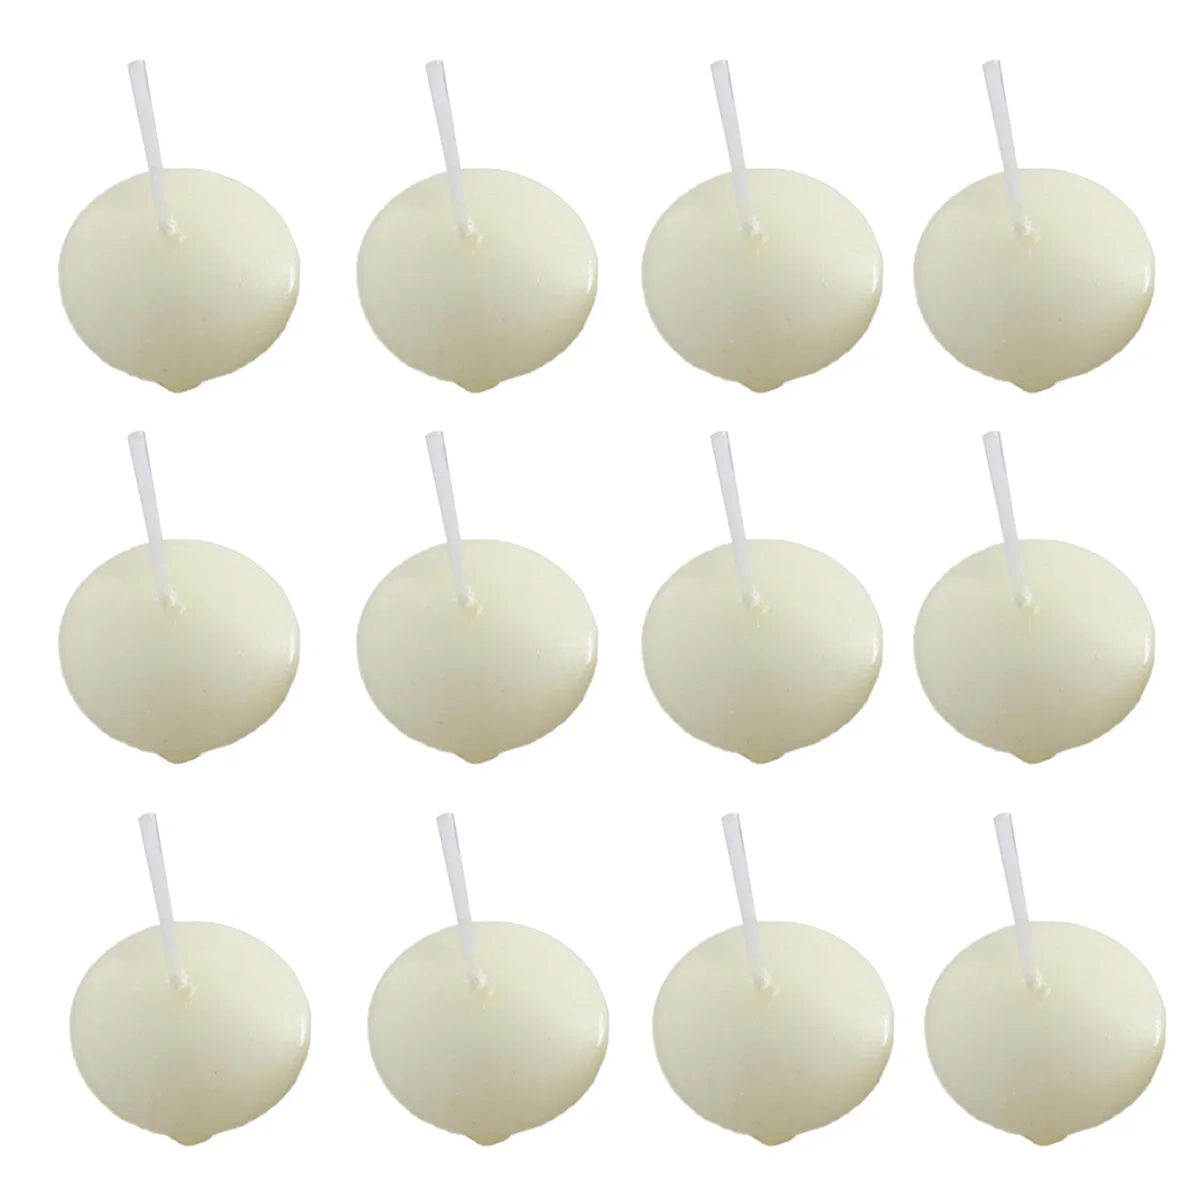 

50Pcs Wedding Supplies Mini Floating Candles Romantic Party Decoration for Event New Year Christmas